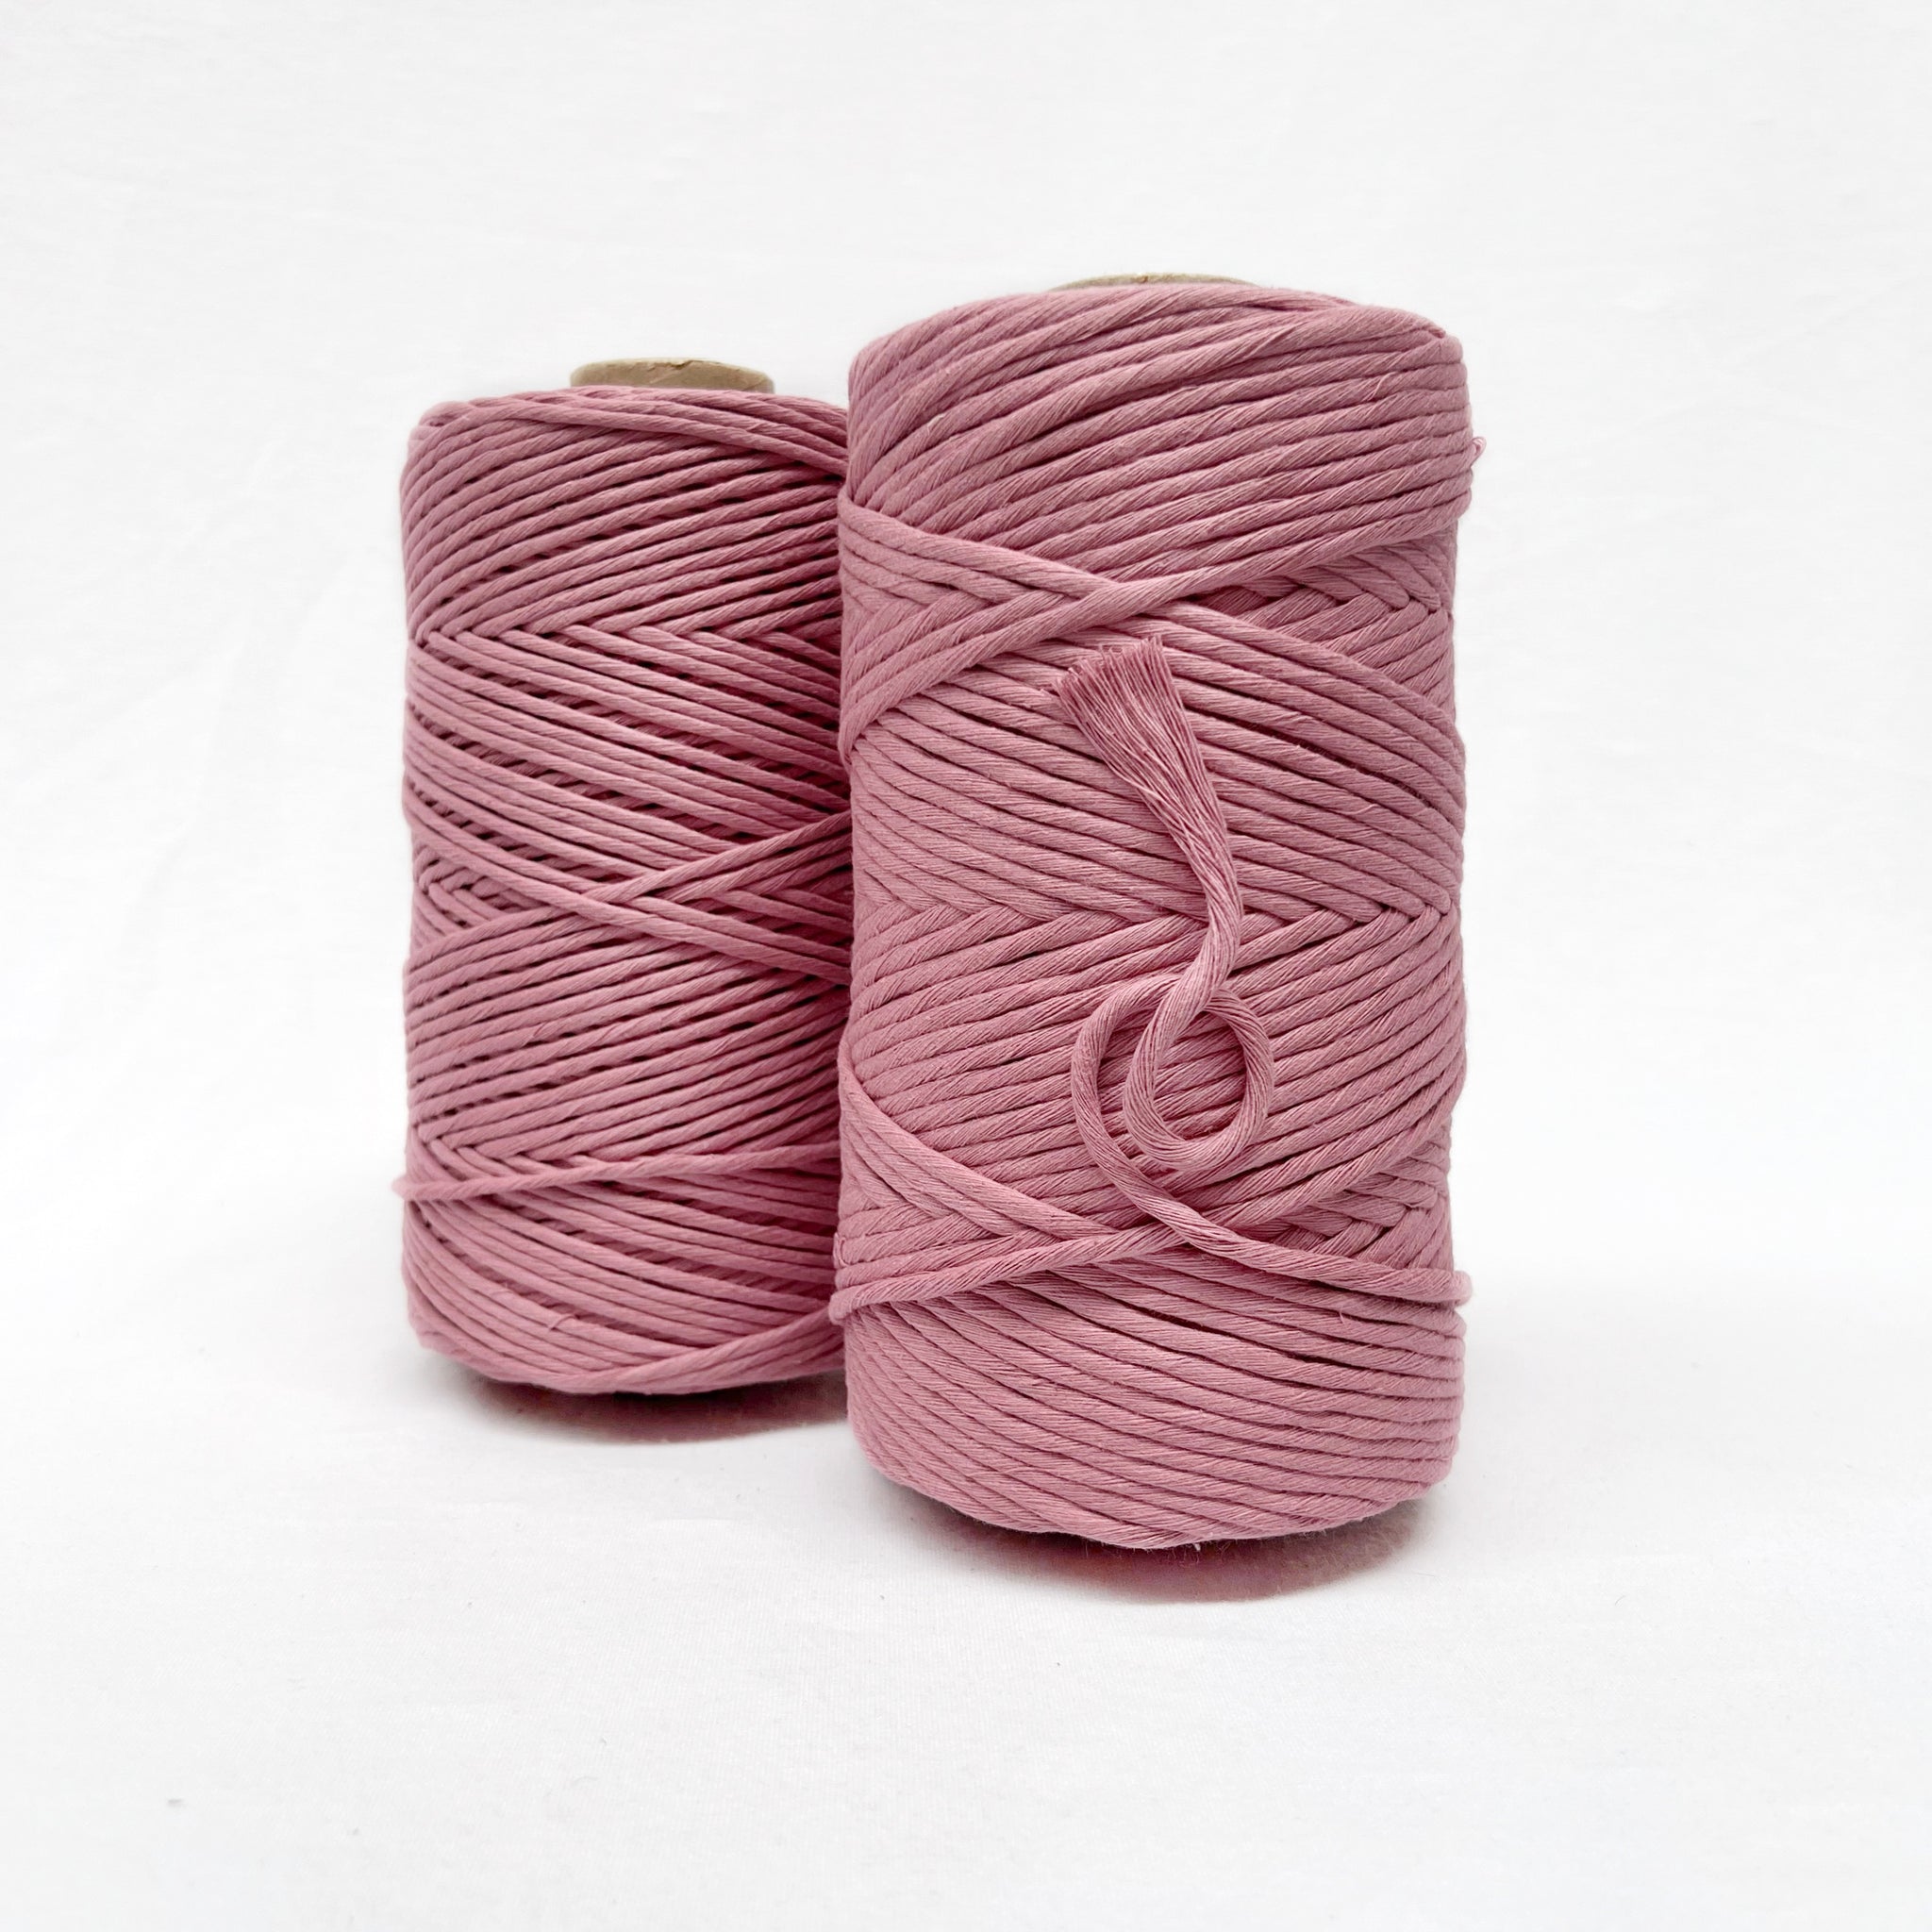 5mm - Macrame Cotton Cord / Wholesale Available - Mary Maker Studio -  Macrame & Weaving Supplies and Education.